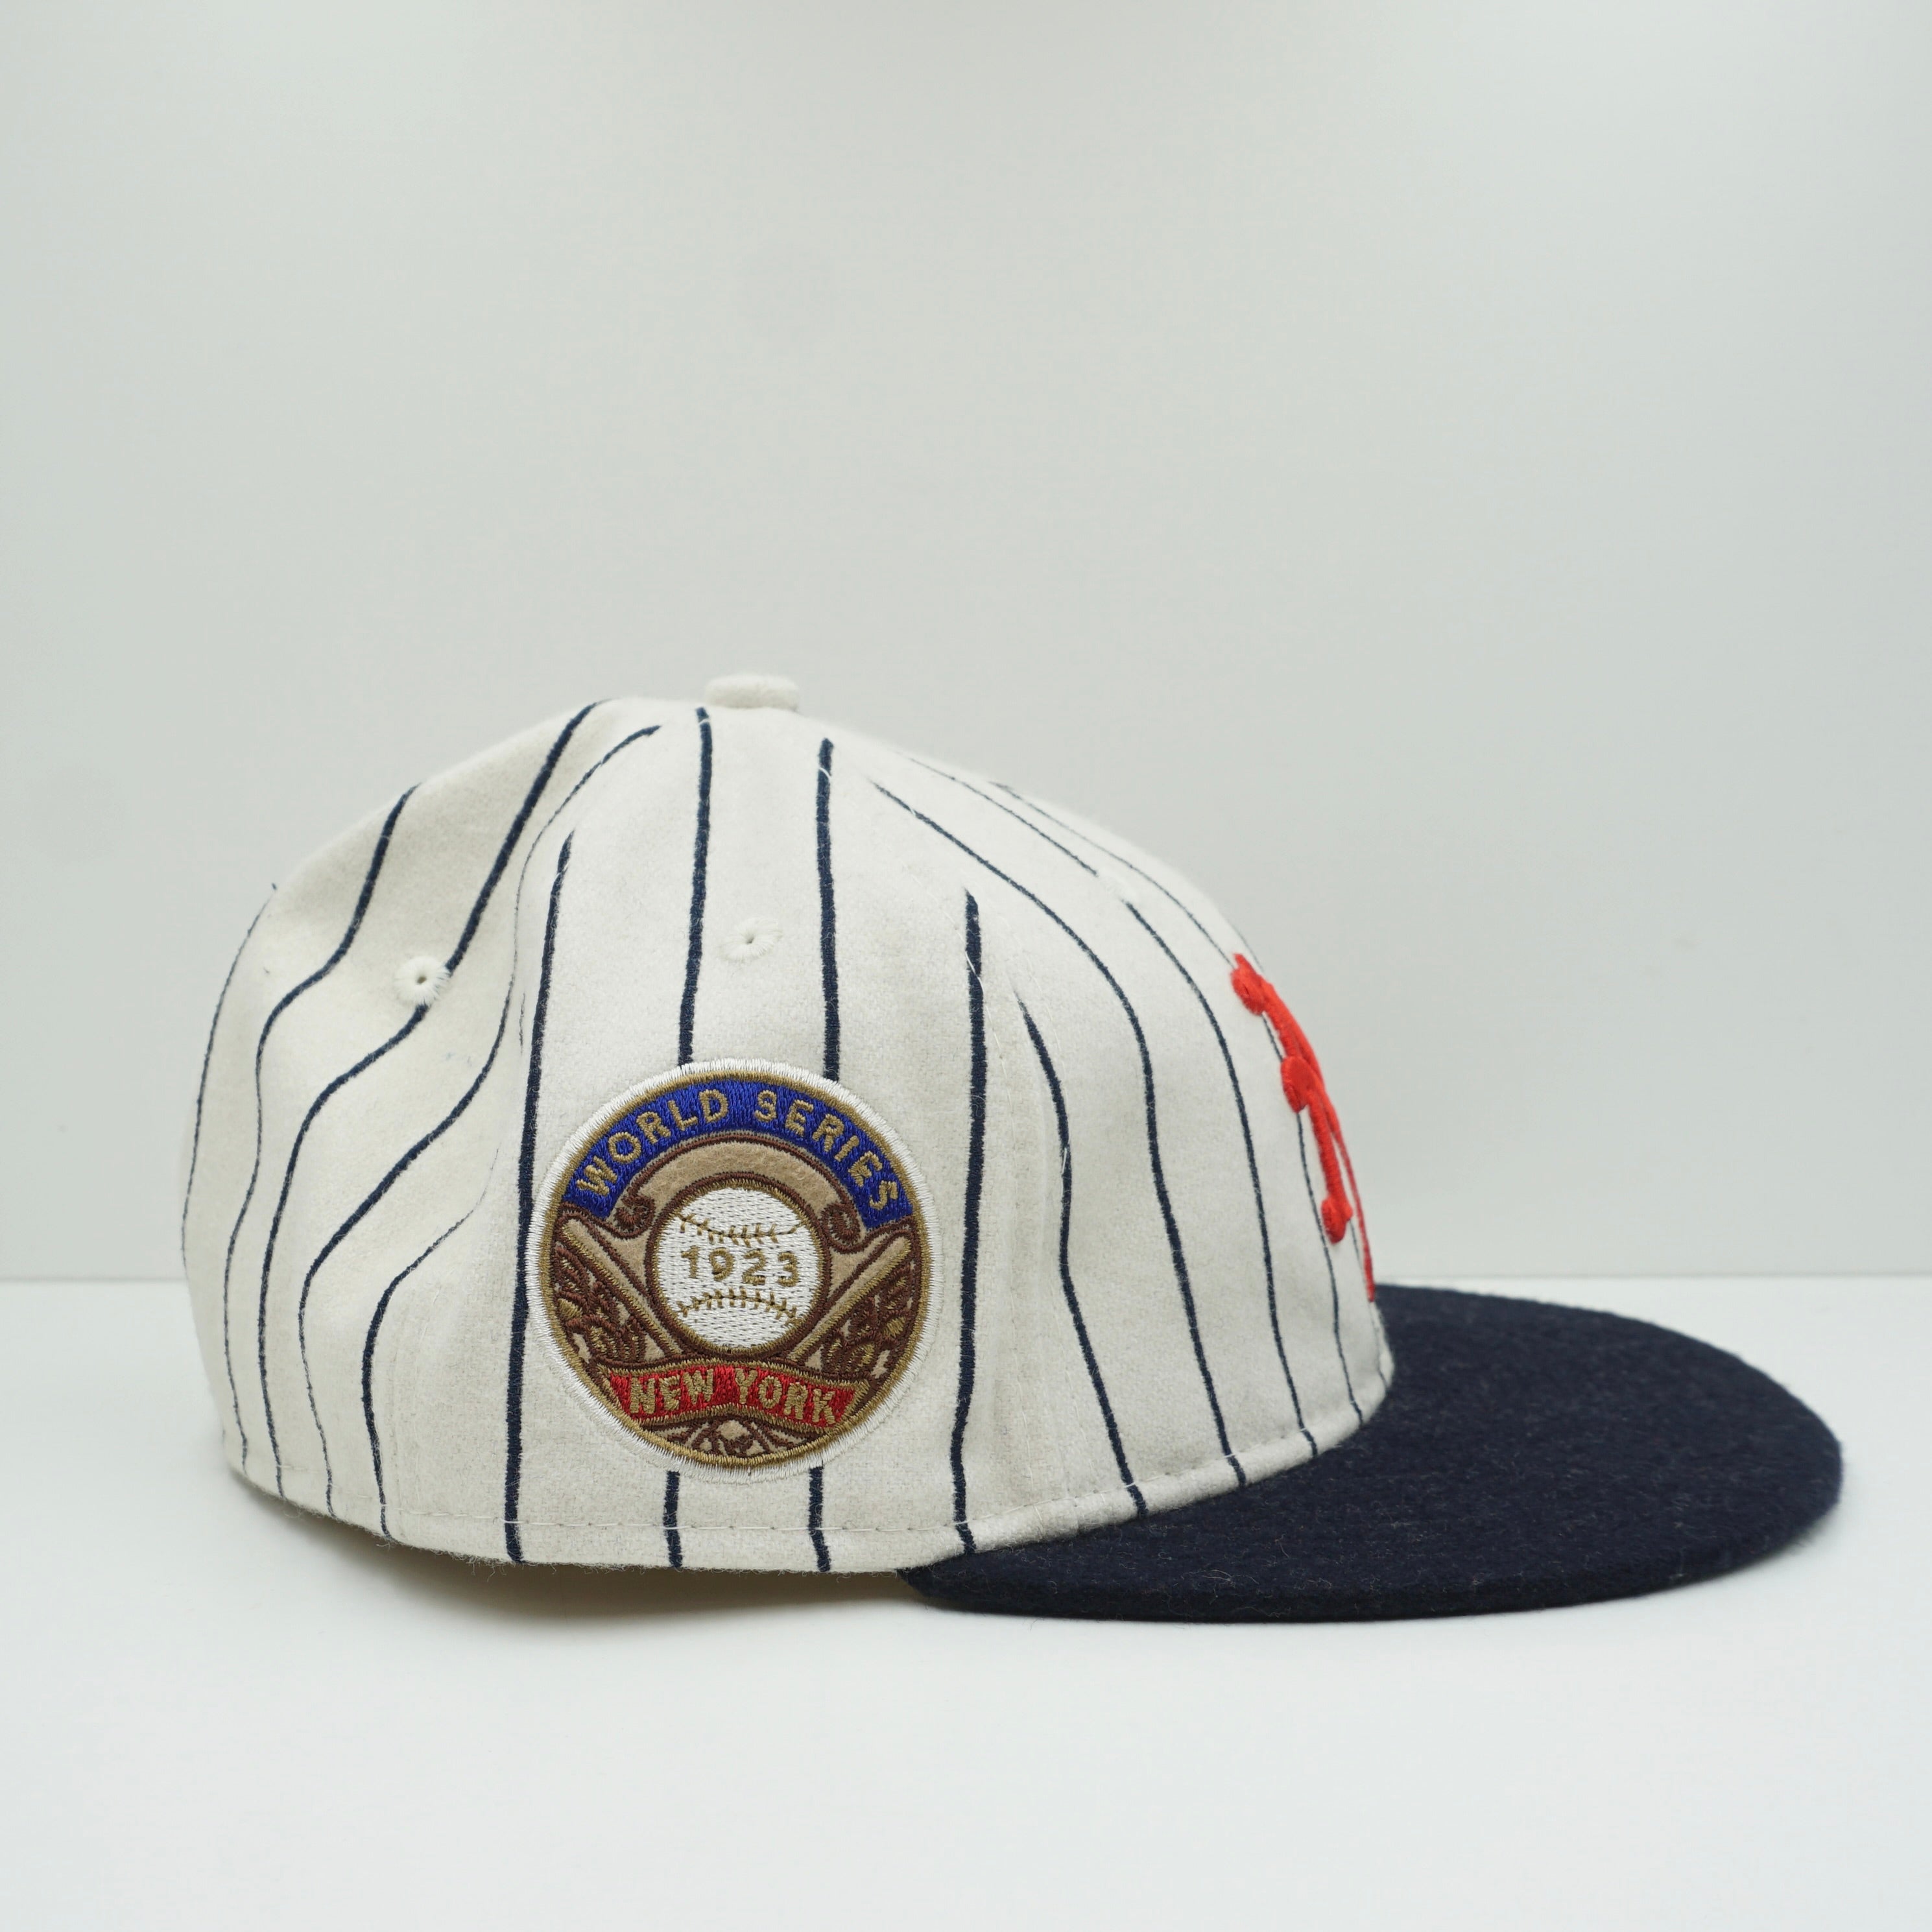 New Era Cooperstown New York Mets Relaxed Heritage Fitted Cap